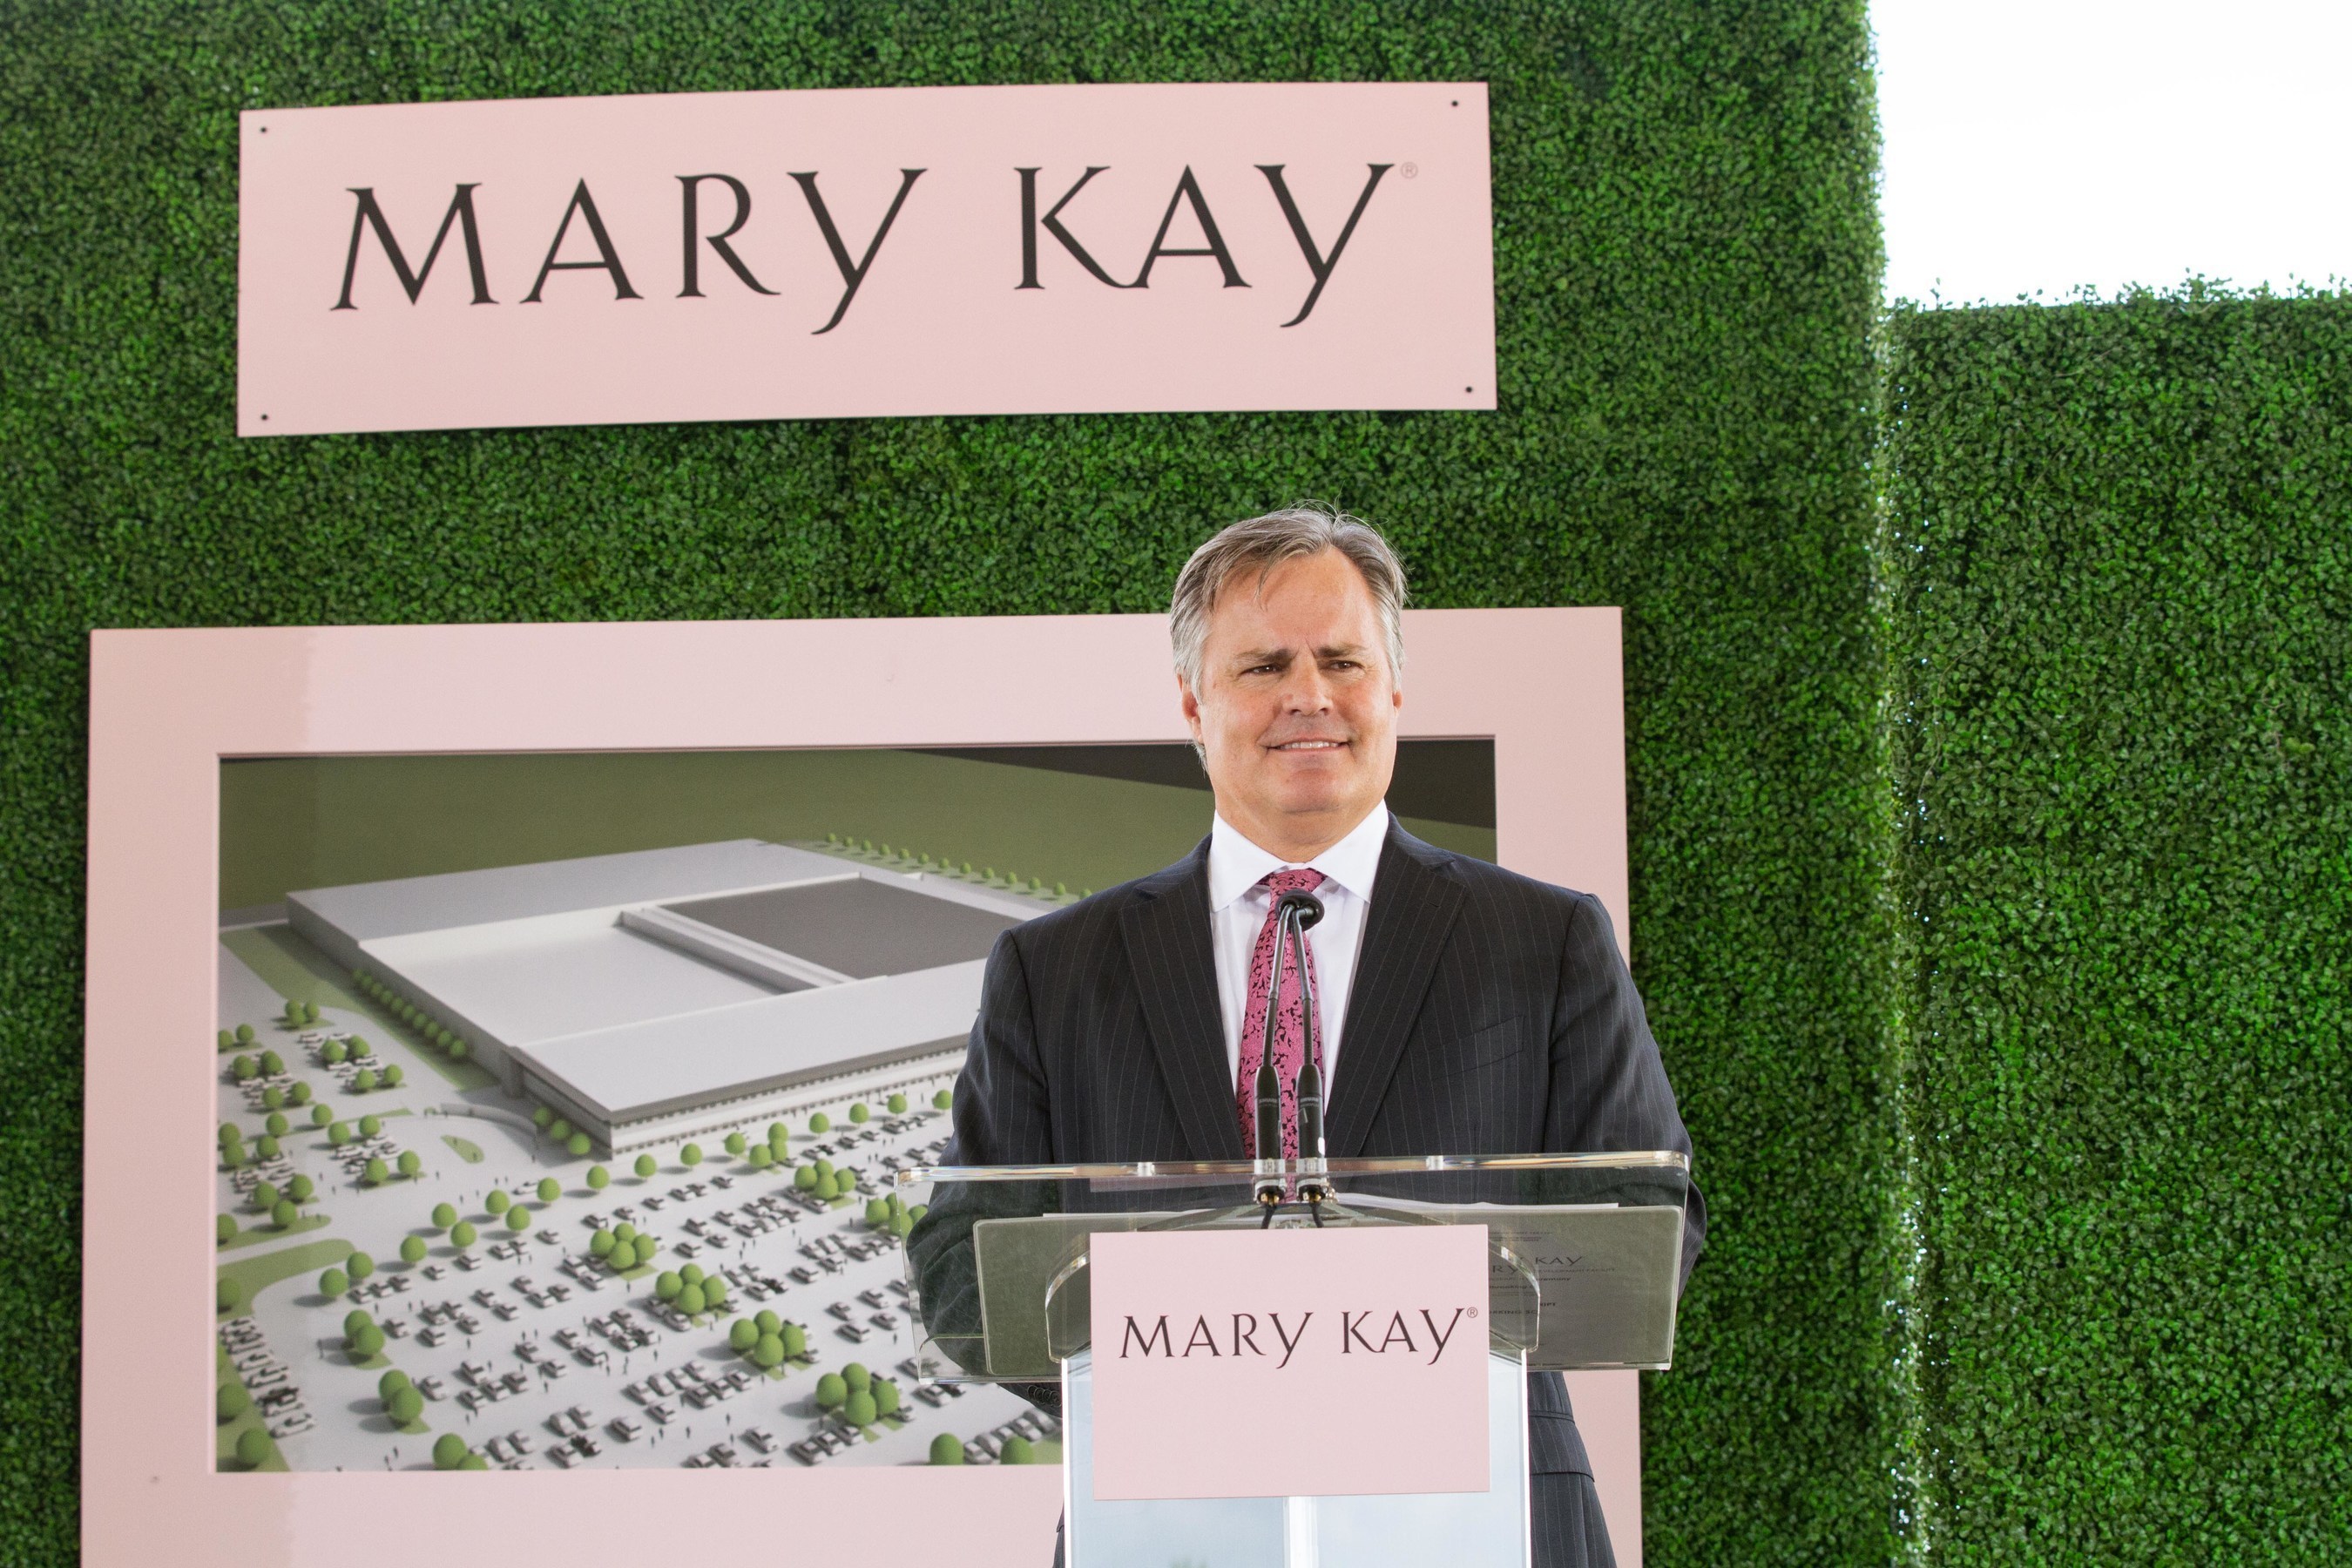 Exactly 53 years to the day after Mary Kay Ash launched her dream company from a small Dallas storefront, Mary Kay Inc. is breaking ground on a new 480,000 square foot U.S.-based global manufacturing and research and development facility located on a 26.2 acre plot of land in Lewisville, Texas. David Holl, Mary Kay Inc. President and CEO announces the $125 million investment to support the company's future needs in producing skin care, color cosmetics and fragrances for more than 3.5 million Mary Kay Independent Beauty Consultants in more than 35 countries.